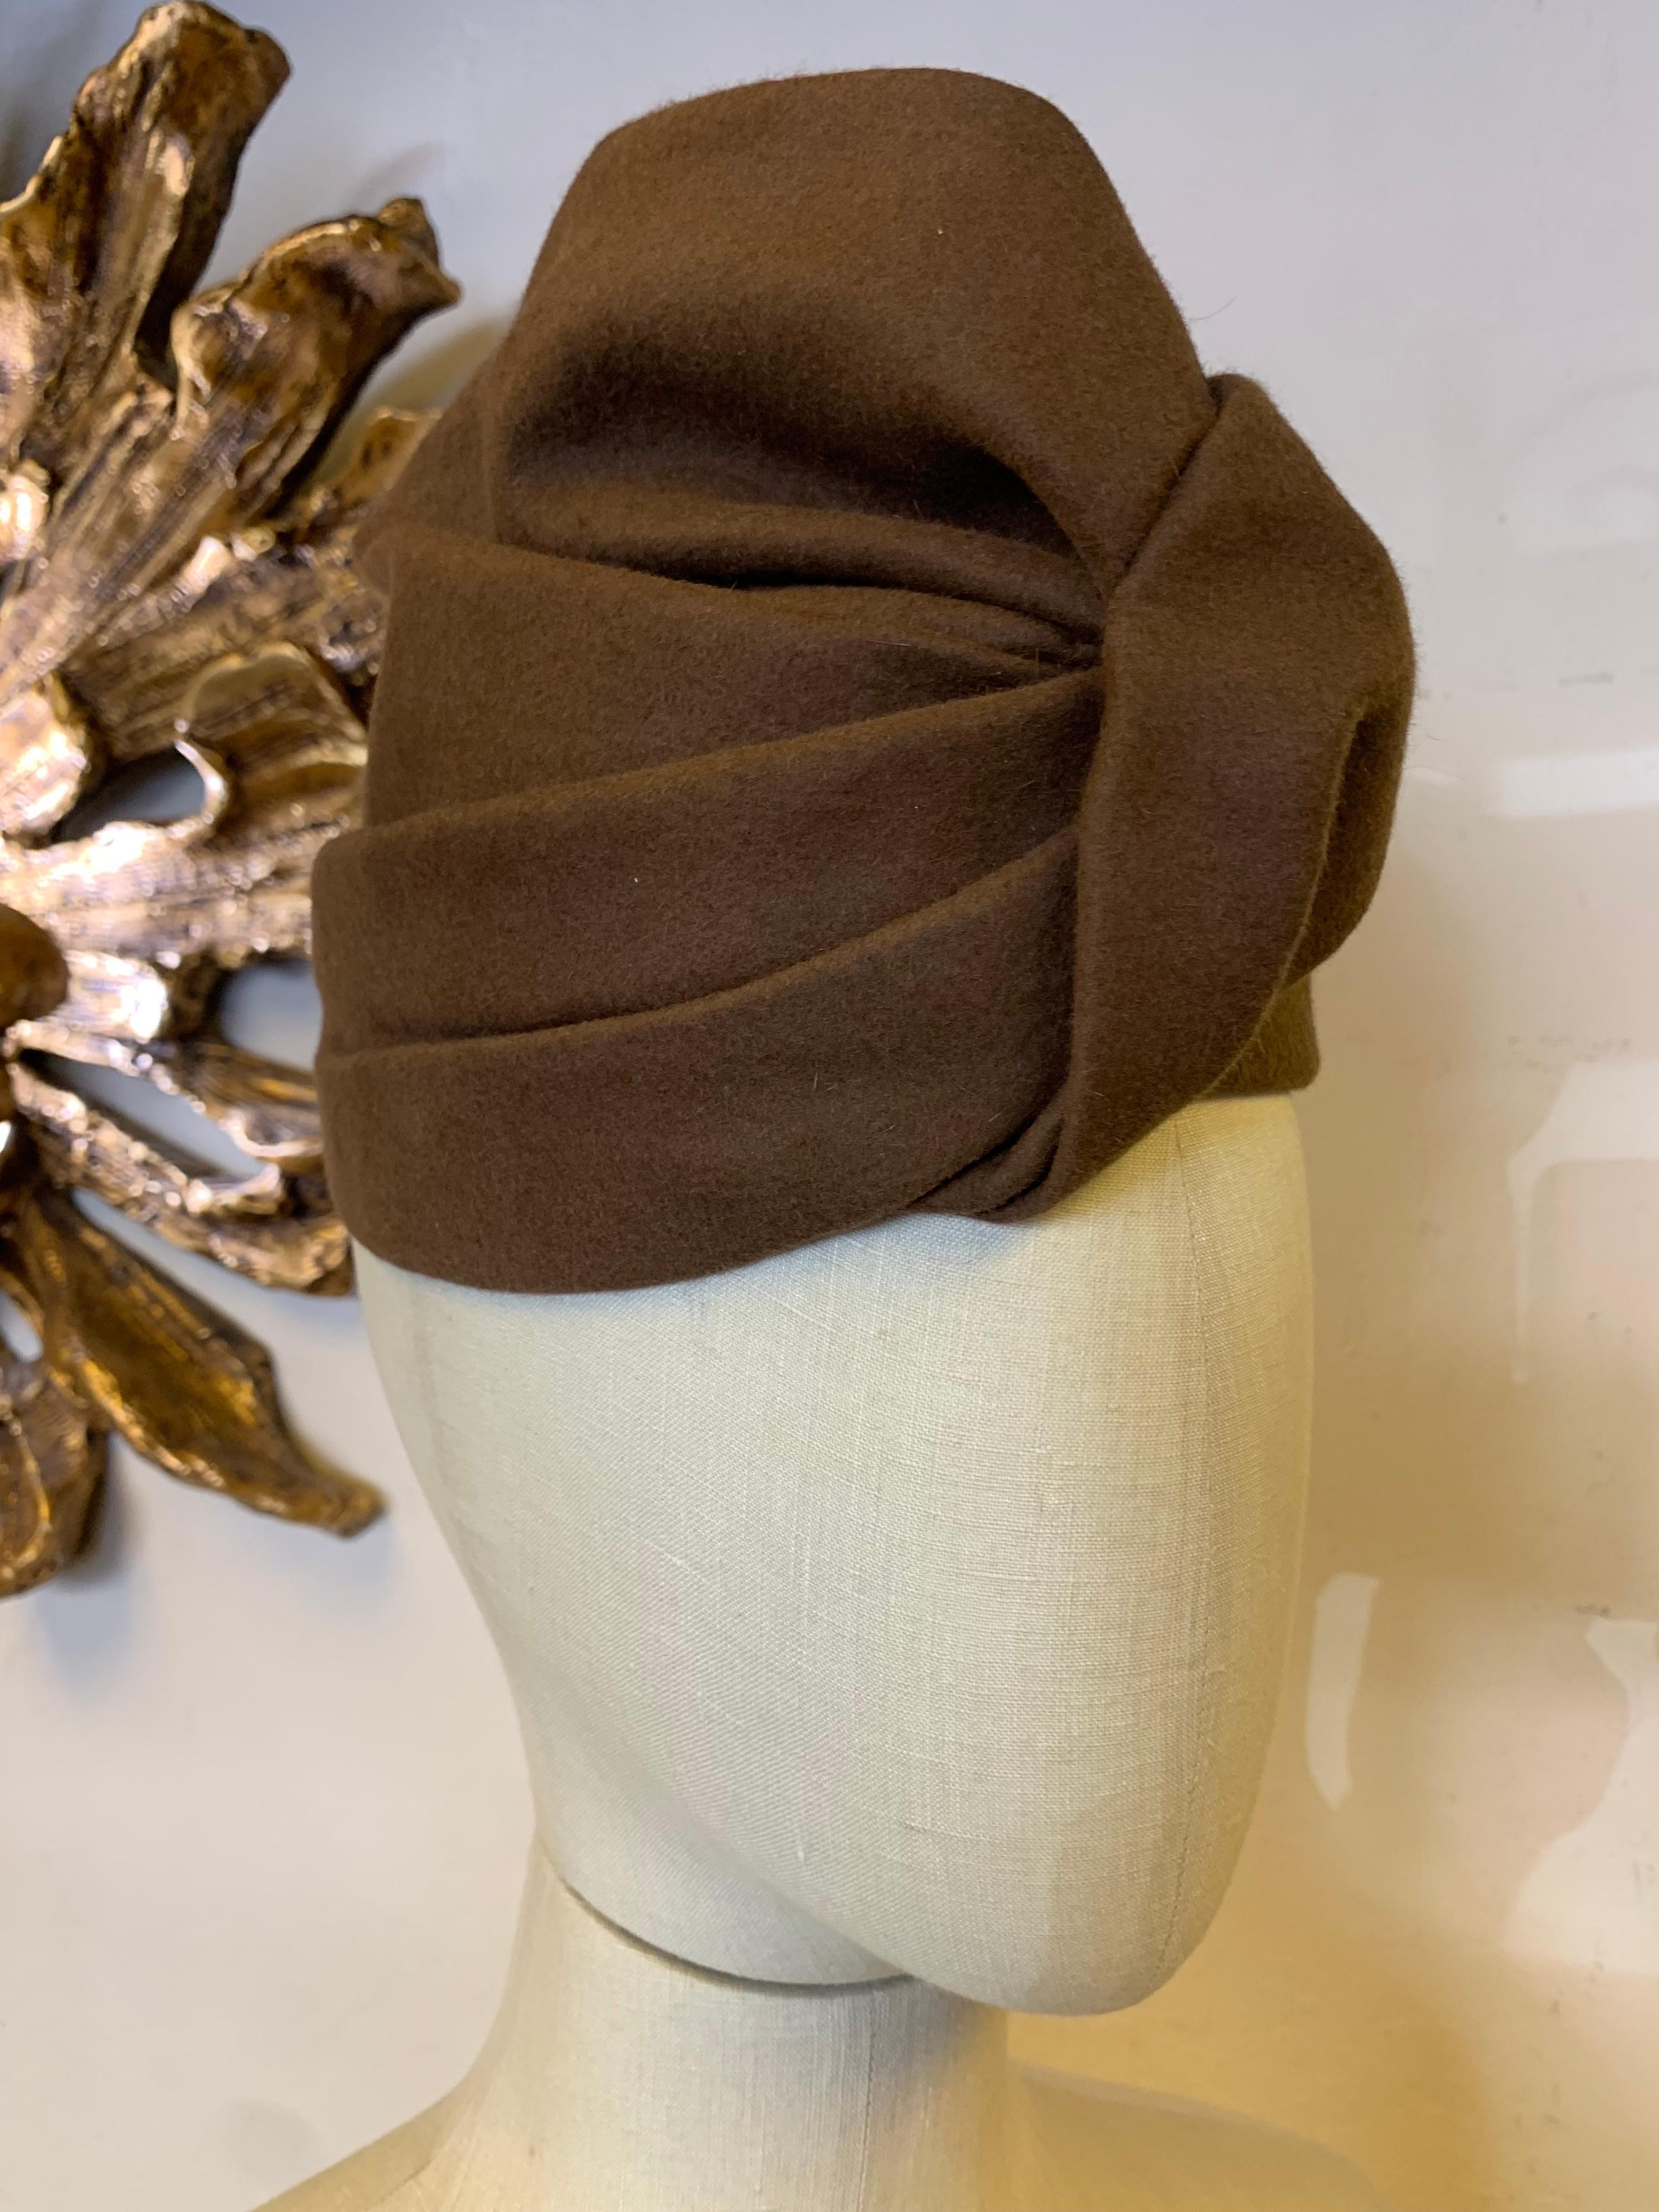 1940s Hattie Carnegie Fine Chestnut Felt Turban Hat:  Simple, striking design from a renowned milliner and designer. Size small.